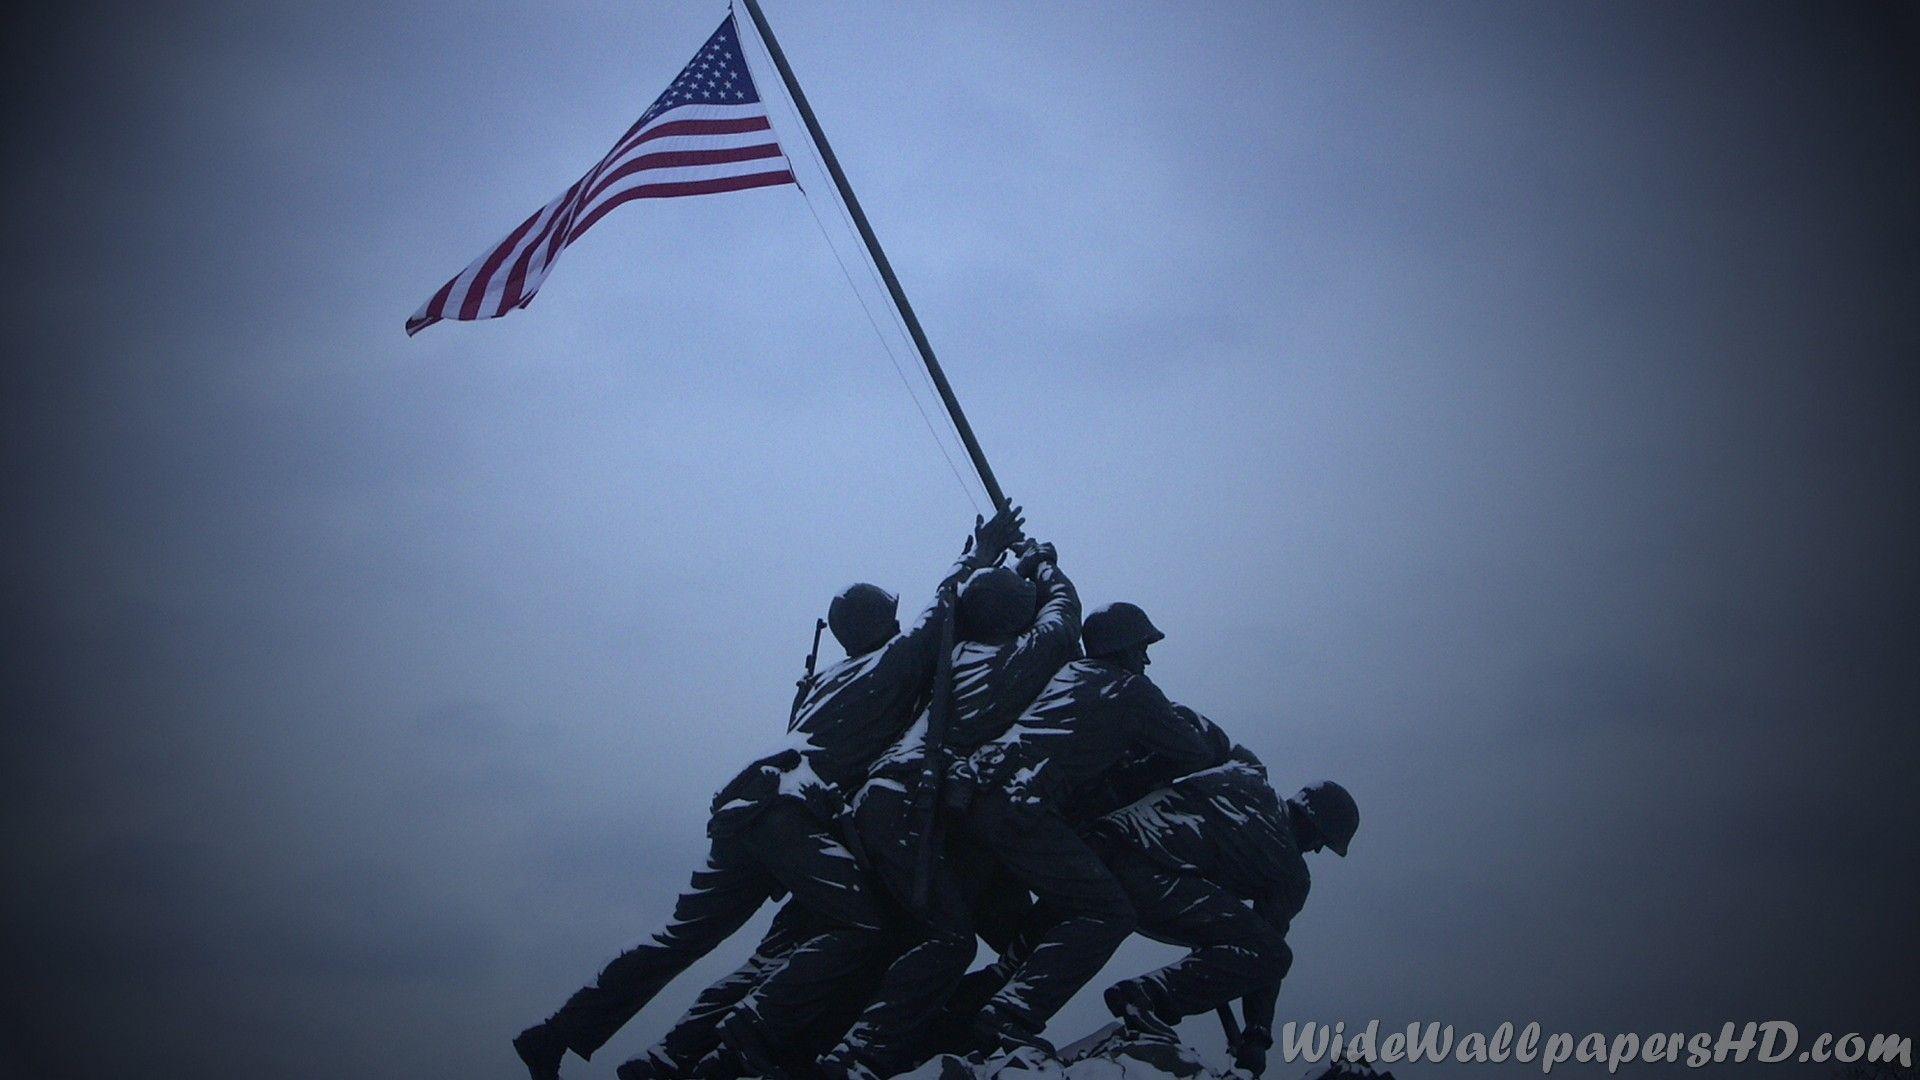 Veterans Day Wallpaper 1920x1080 and Veterans Day Image